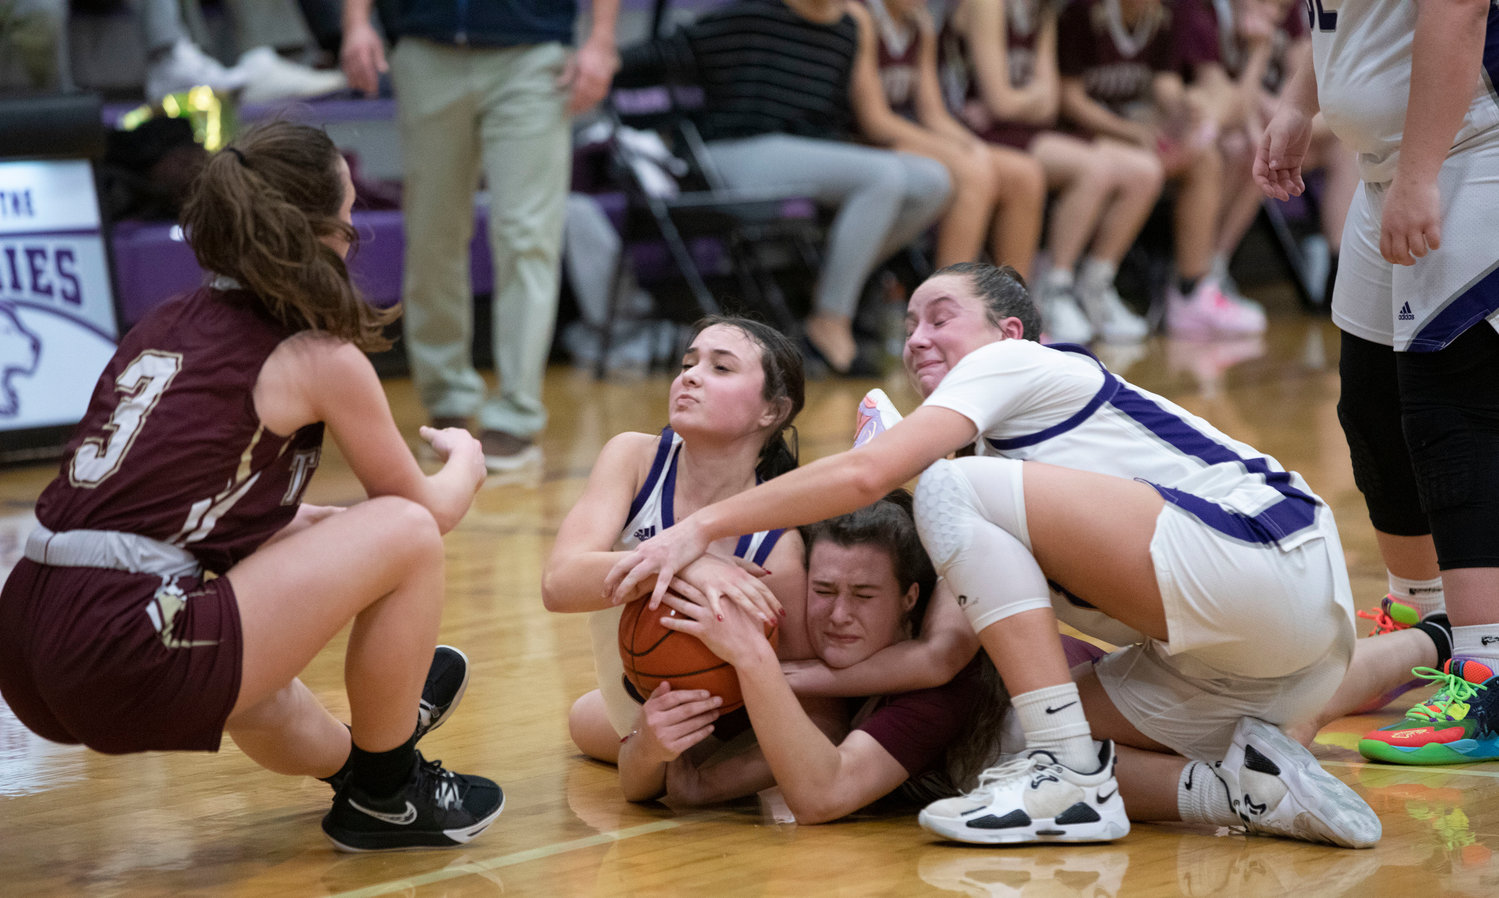 Tiverton guard Ellery Pacheco (left) tugs at the ball to help teammate Abbie Monkevicz (middle), while Huskies guard Maddy Butterworth and Reyn Ferris try to wrestle it away from her.